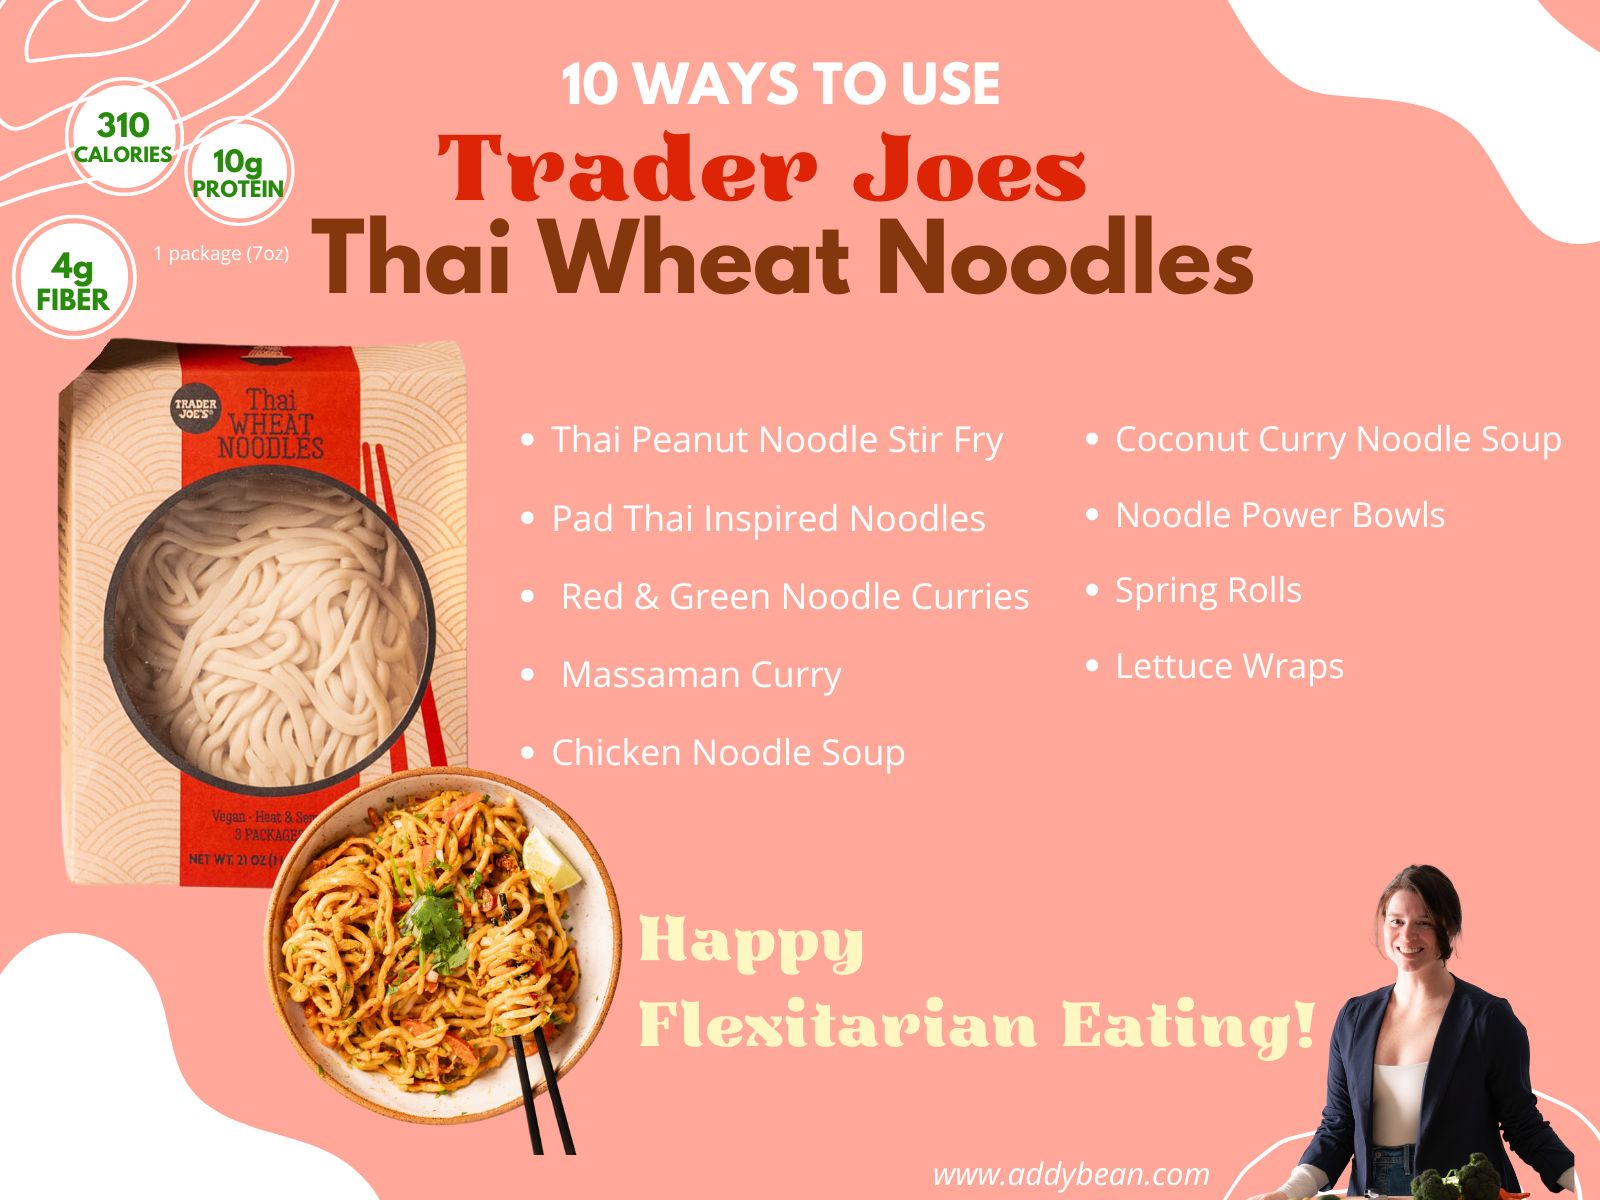 Infographic for 10 ways to use Trader Joes Thai Wheat Noodles with a picture of the noodles, a bowl of noodles and the author